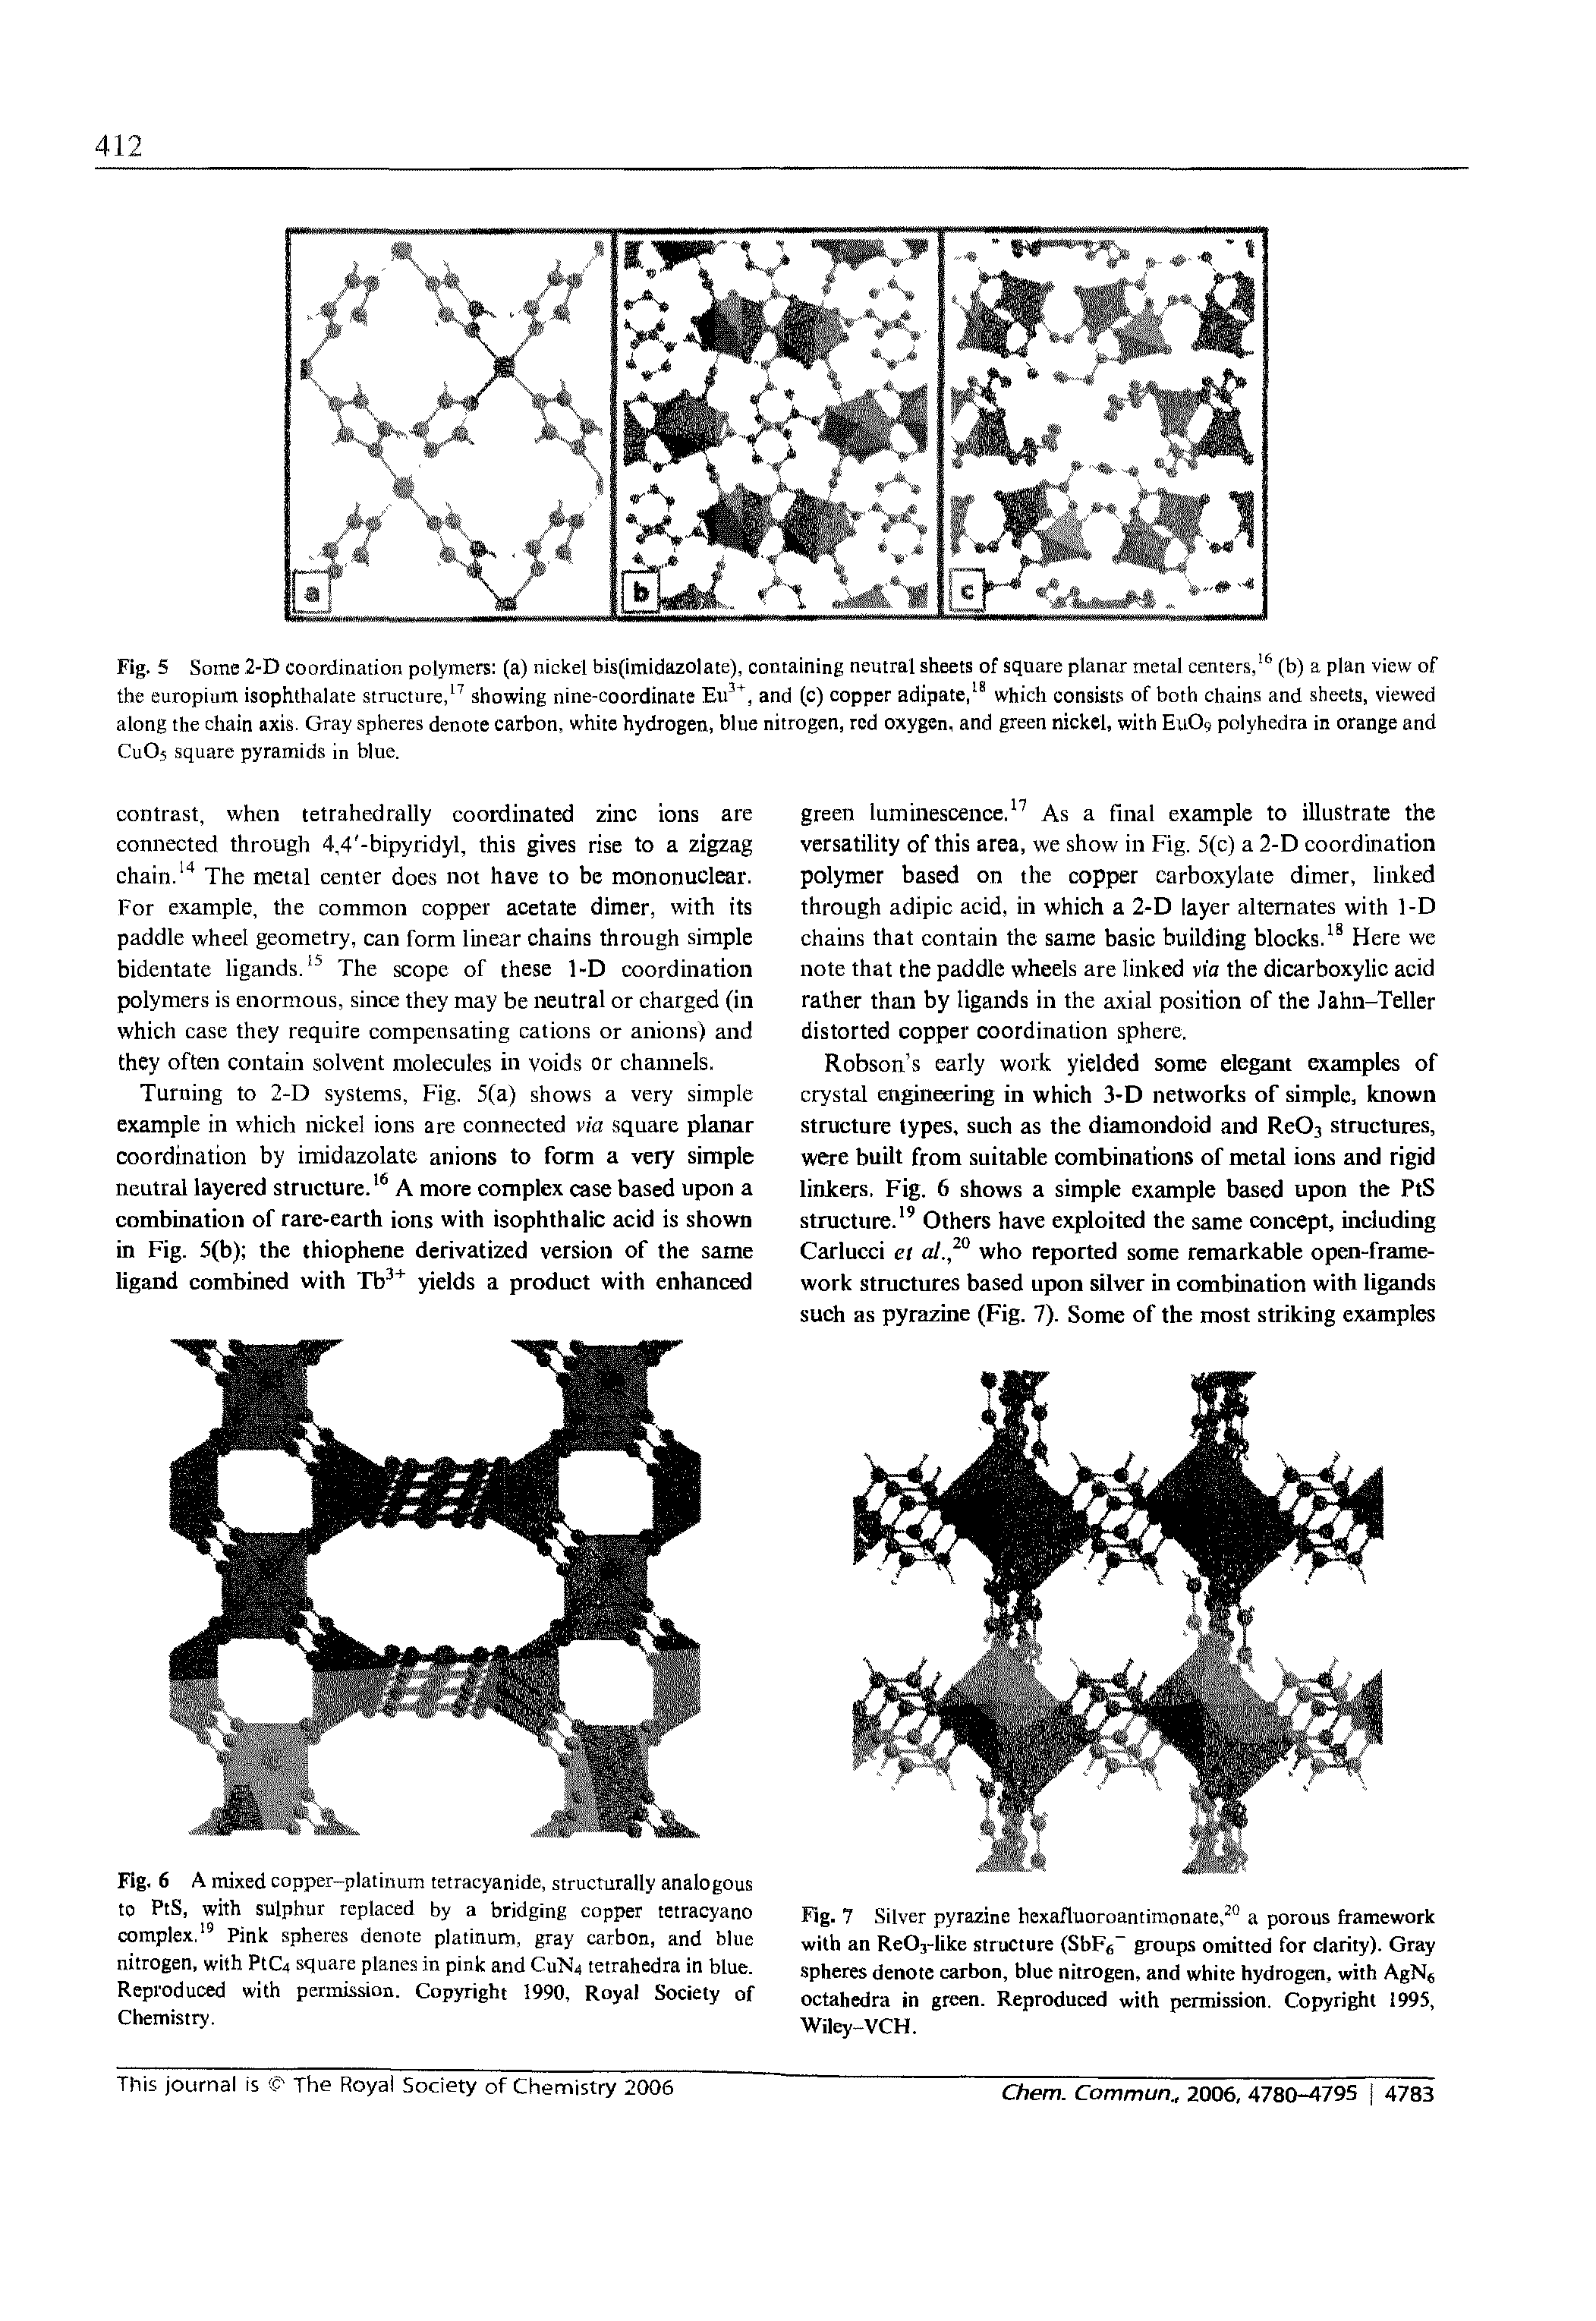 Fig. 5 Some 2-D coordination polymers (a) nickel bis(imidazolate), containing neutral sheets of square planar metal centers,16 (b) a plan view of the europium isophthalate structure,17 showing nine-coordinate Eu3+, and (c) copper adipate,18 which consists of both chains and sheets, viewed along the chain axis. Gray spheres denote carbon, white hydrogen, blue nitrogen, red oxygen, and green nickel, with EuO, polyhedra in orange and CuOs square pyramids in blue.